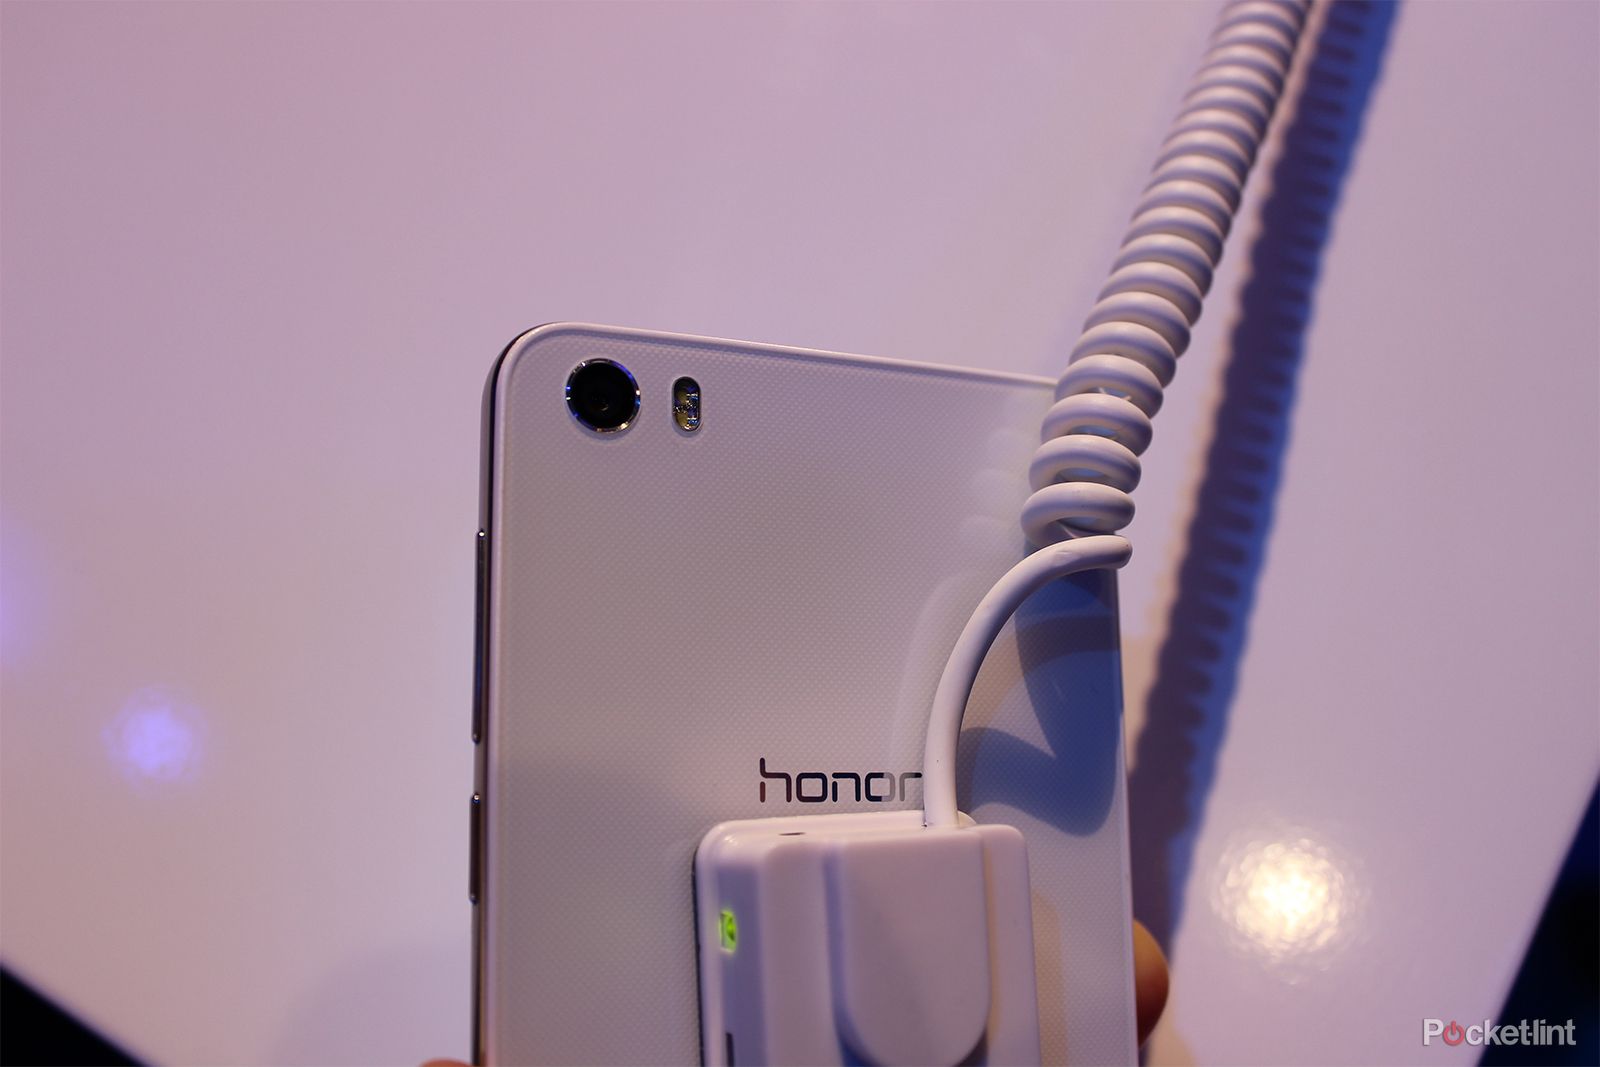 honor 6 it s fast and affordable hands on image 8